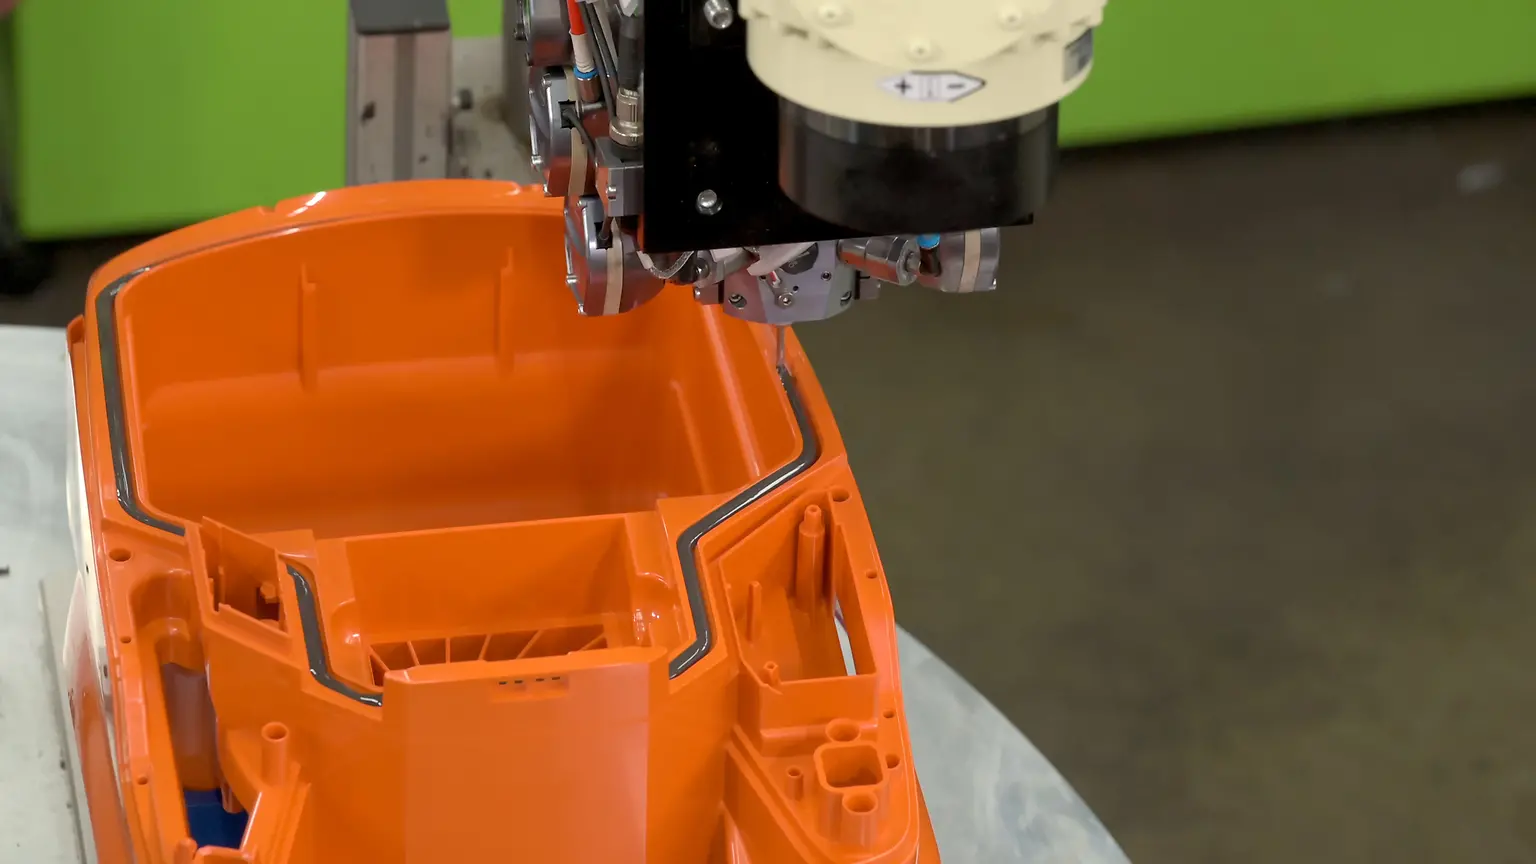 
The mixing head mounted on the 6-axis robot applies 2K polyurethane foam into the groove to seal the vacuum cleaner housing.